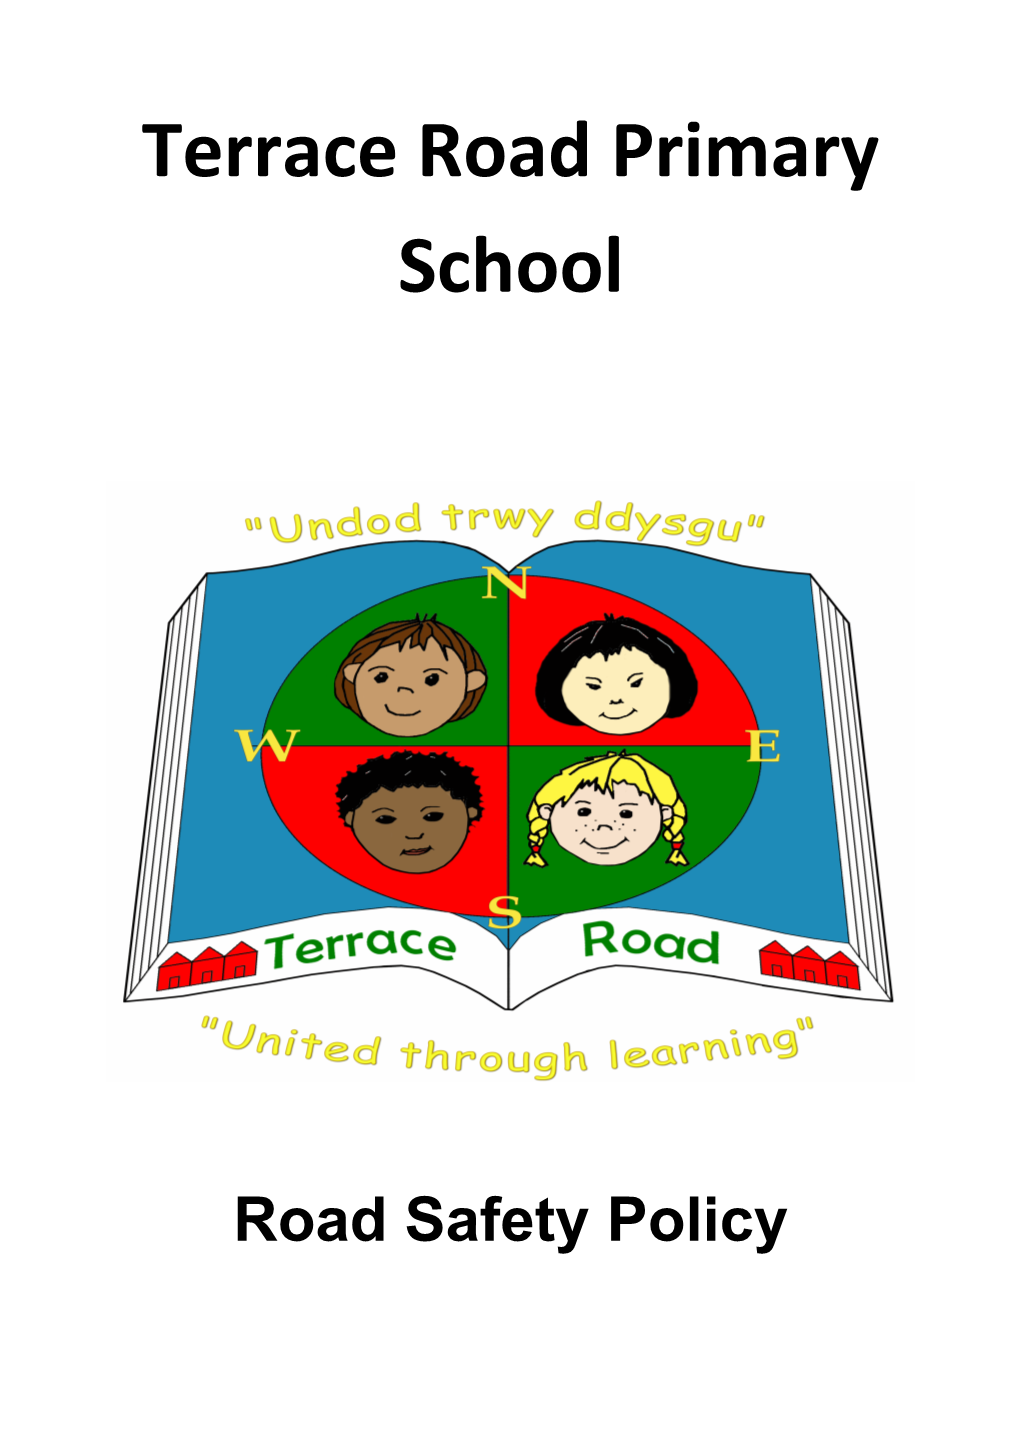 Road Safety Policy